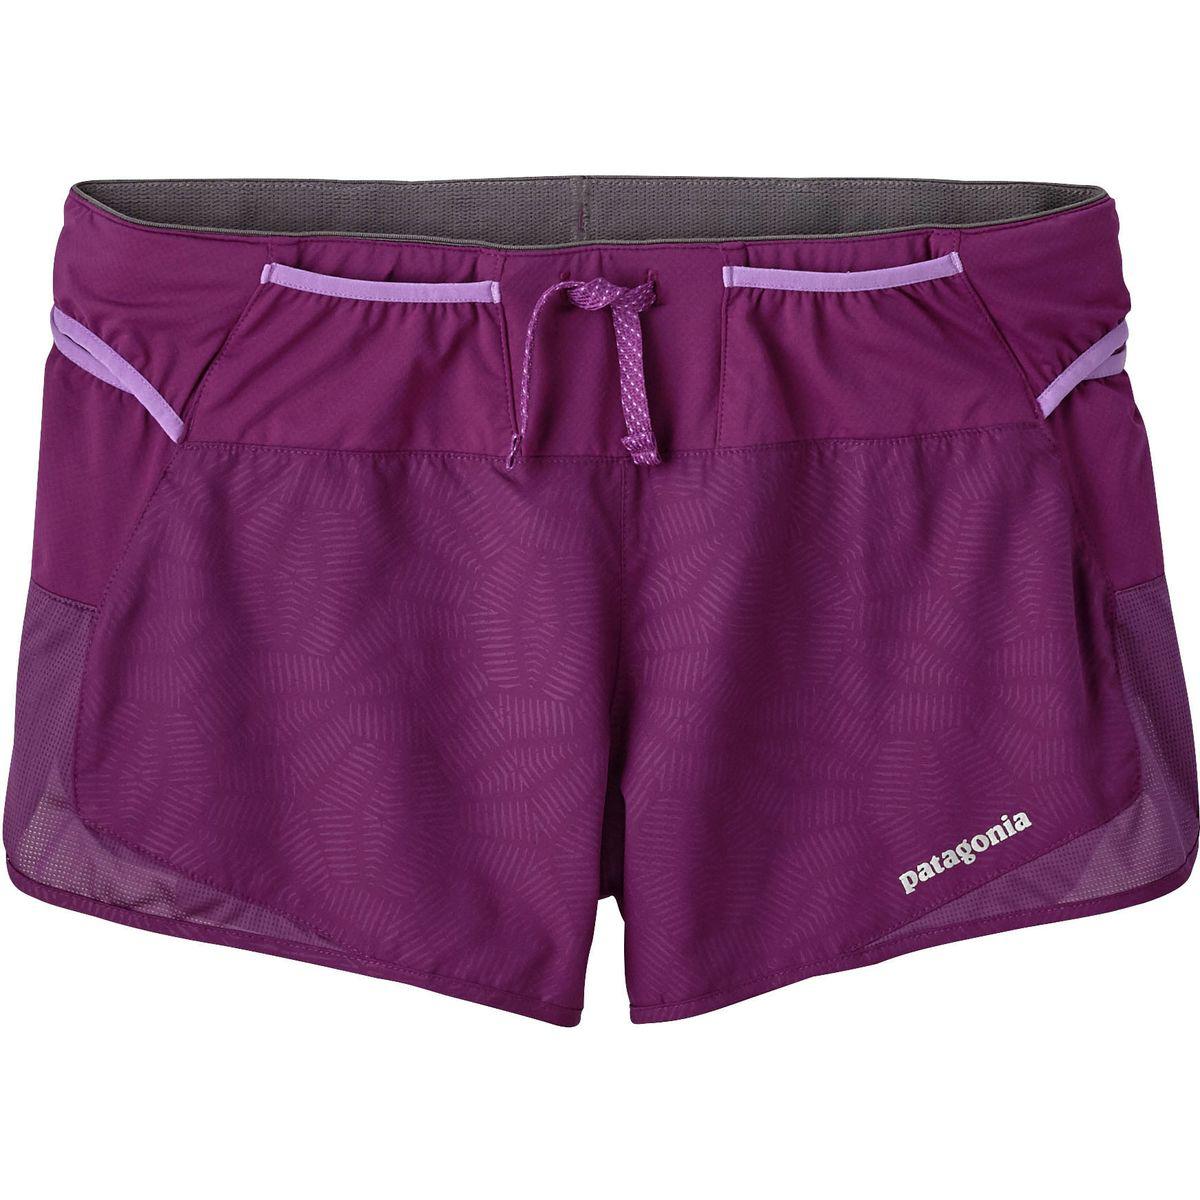 Patagonia Synthetic Strider Pro Running Short in Purple - Save 25% - Lyst